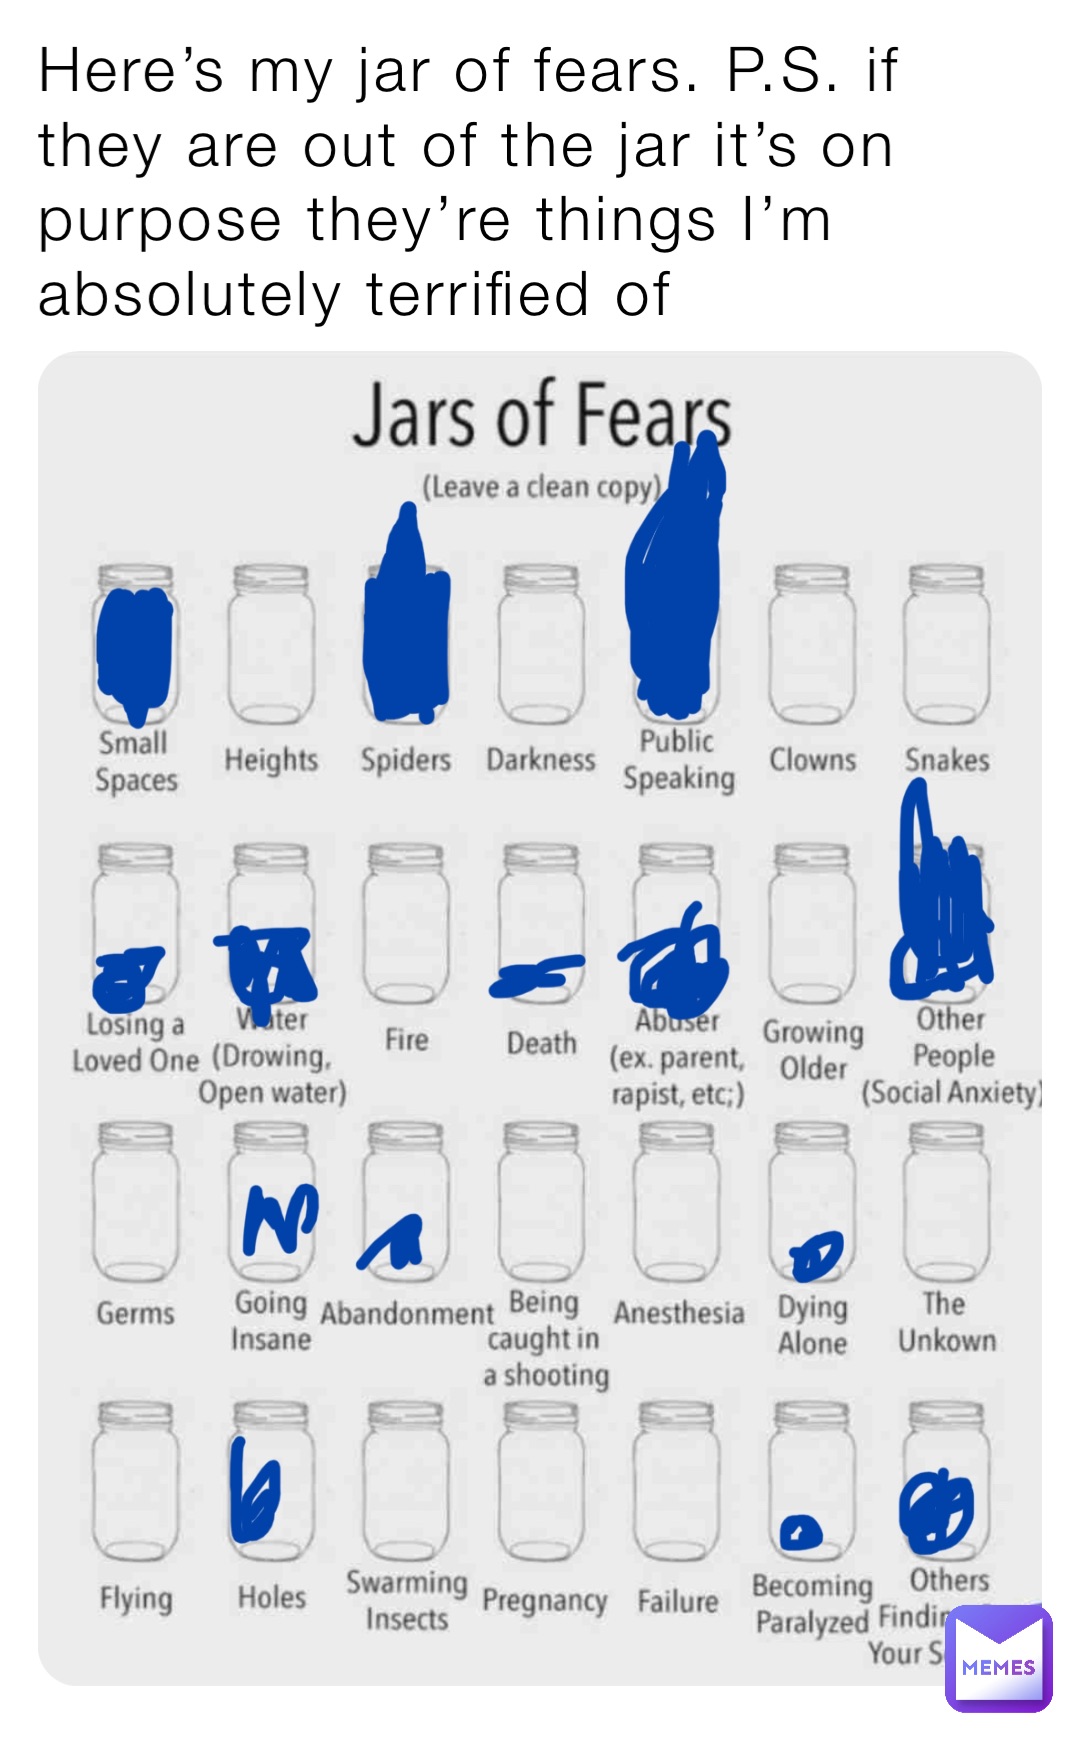 Here’s my jar of fears. P.S. if they are out of the jar it’s on purpose they’re things I’m absolutely terrified of